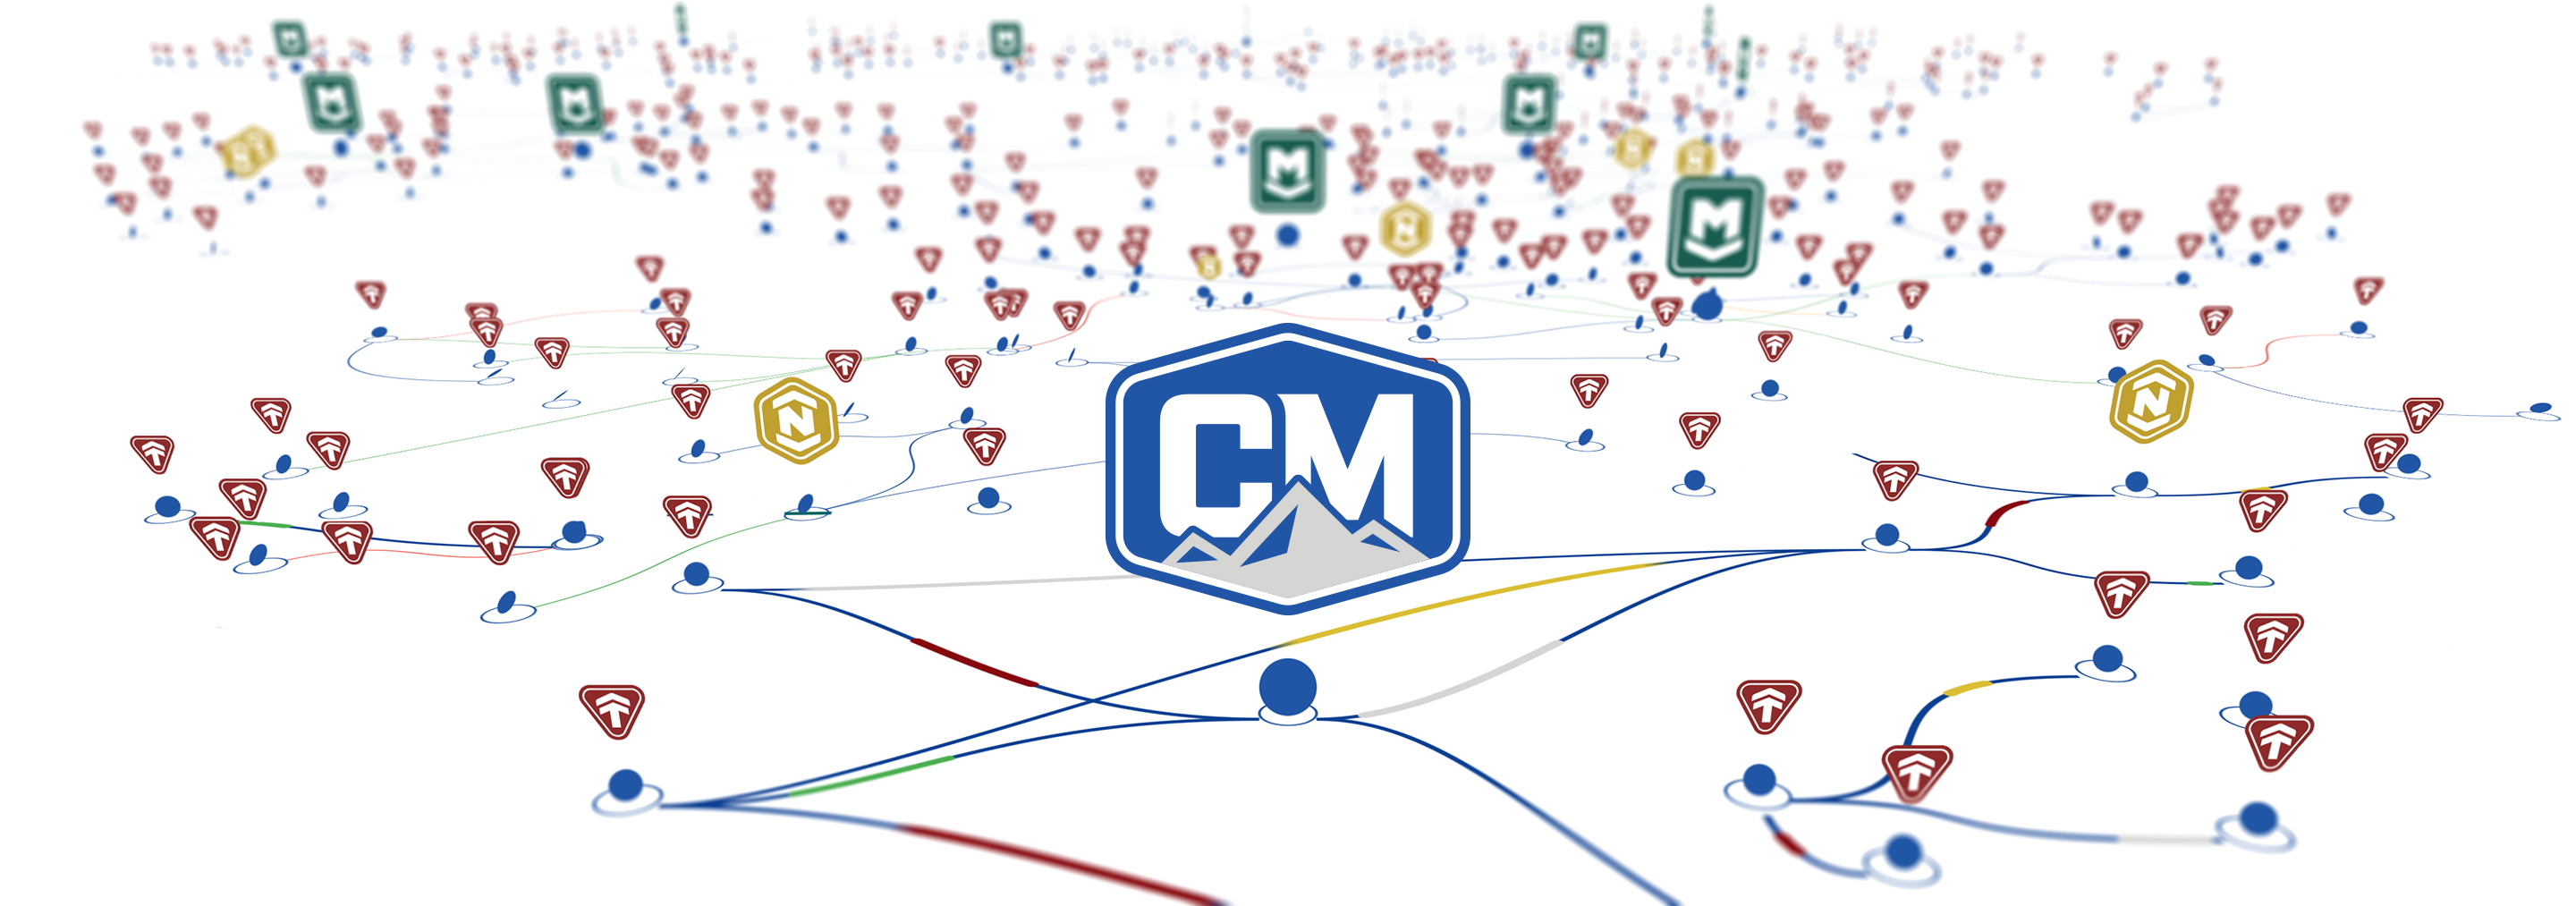 A 3D landscape populated by the CodeMettle product icons all connected by blue lines, with the CodeMettle logo in the center